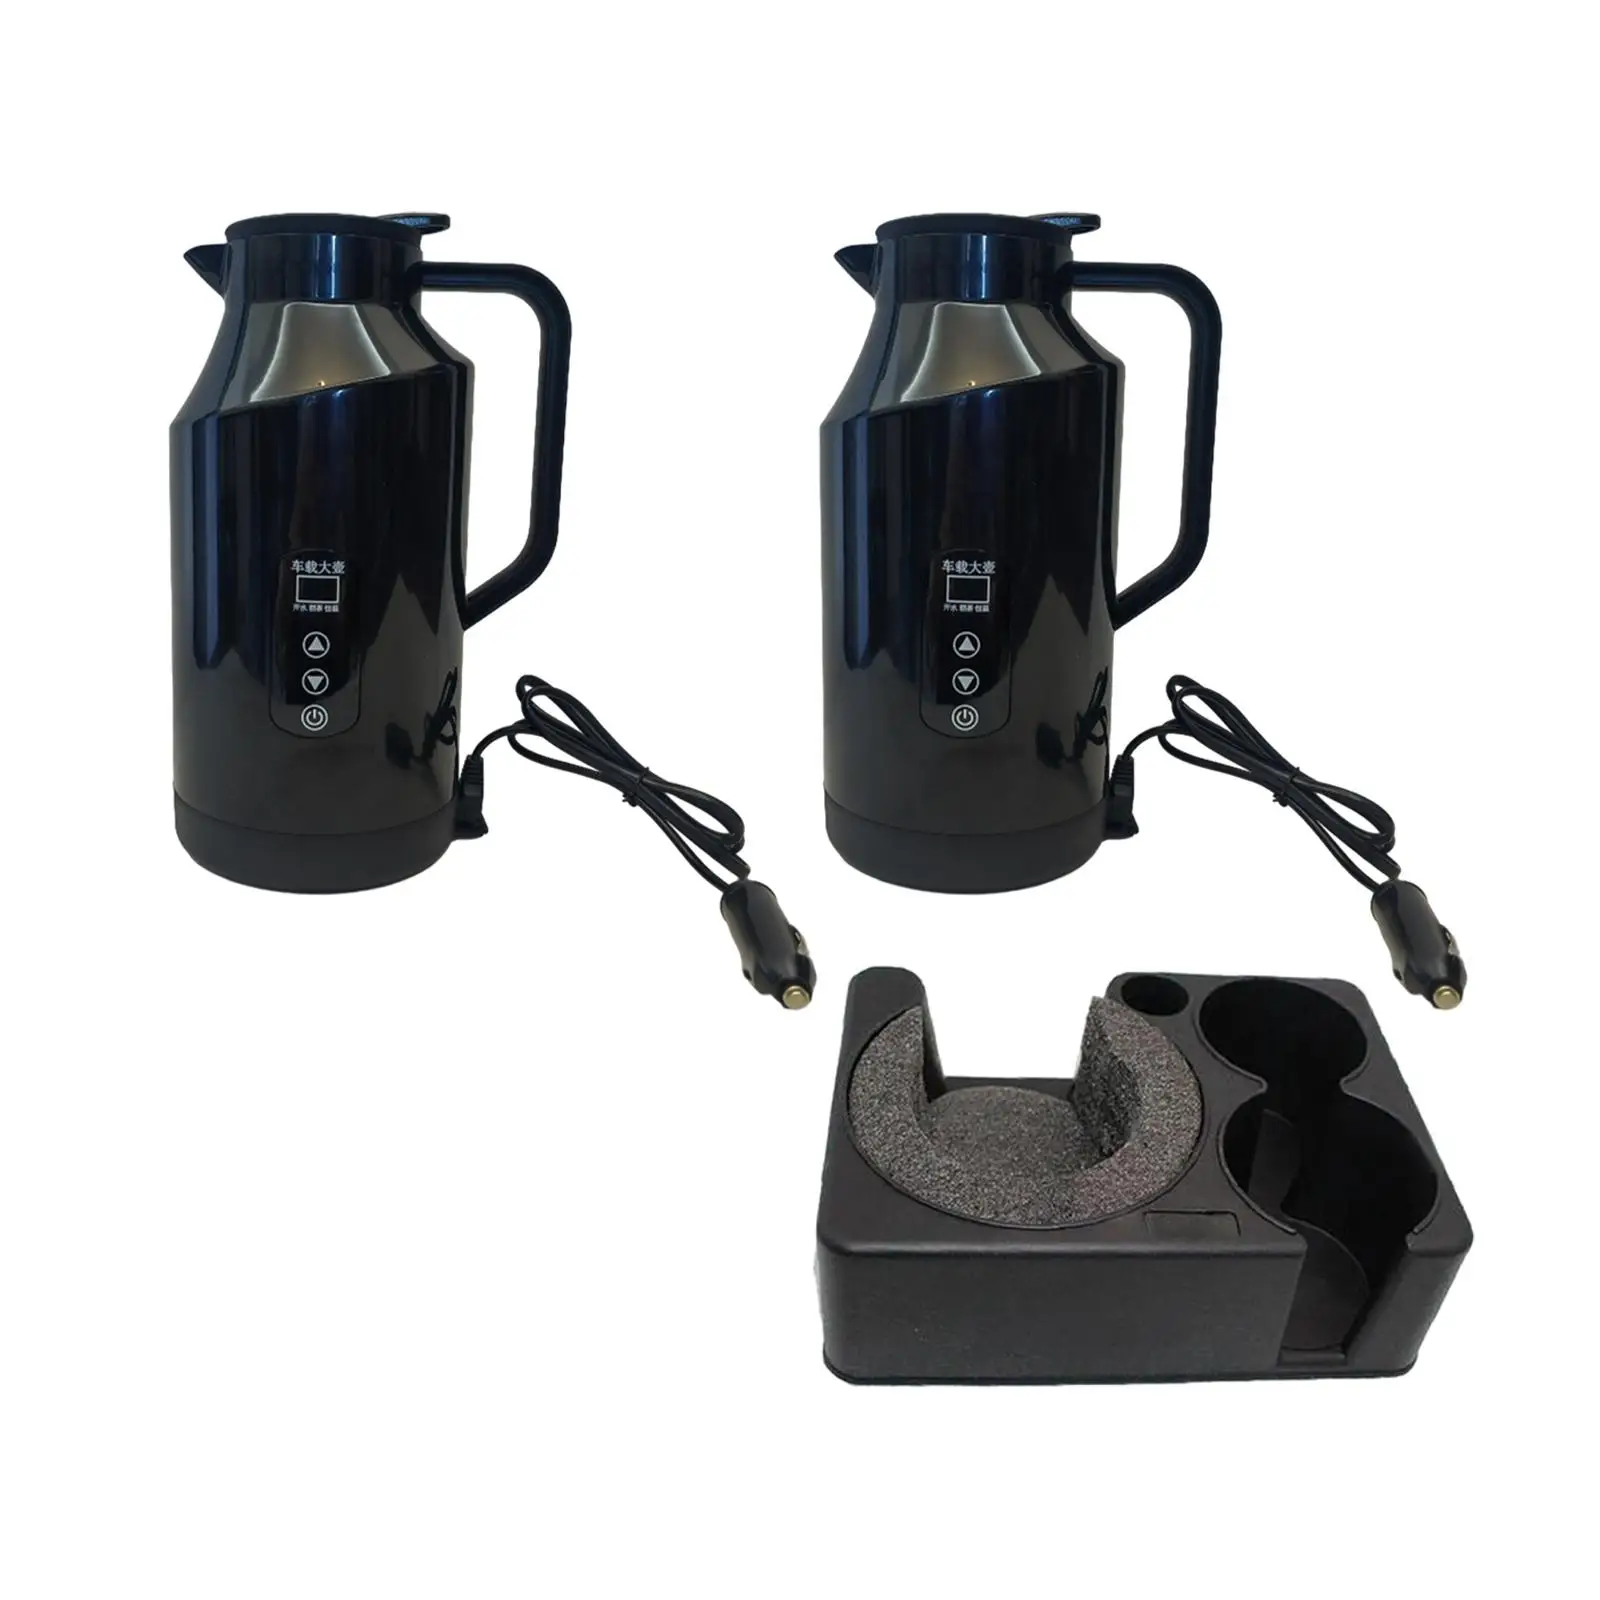 Car Heating Drinking Cup Travel Kettle 1.4L Stainless Steel for Drivers